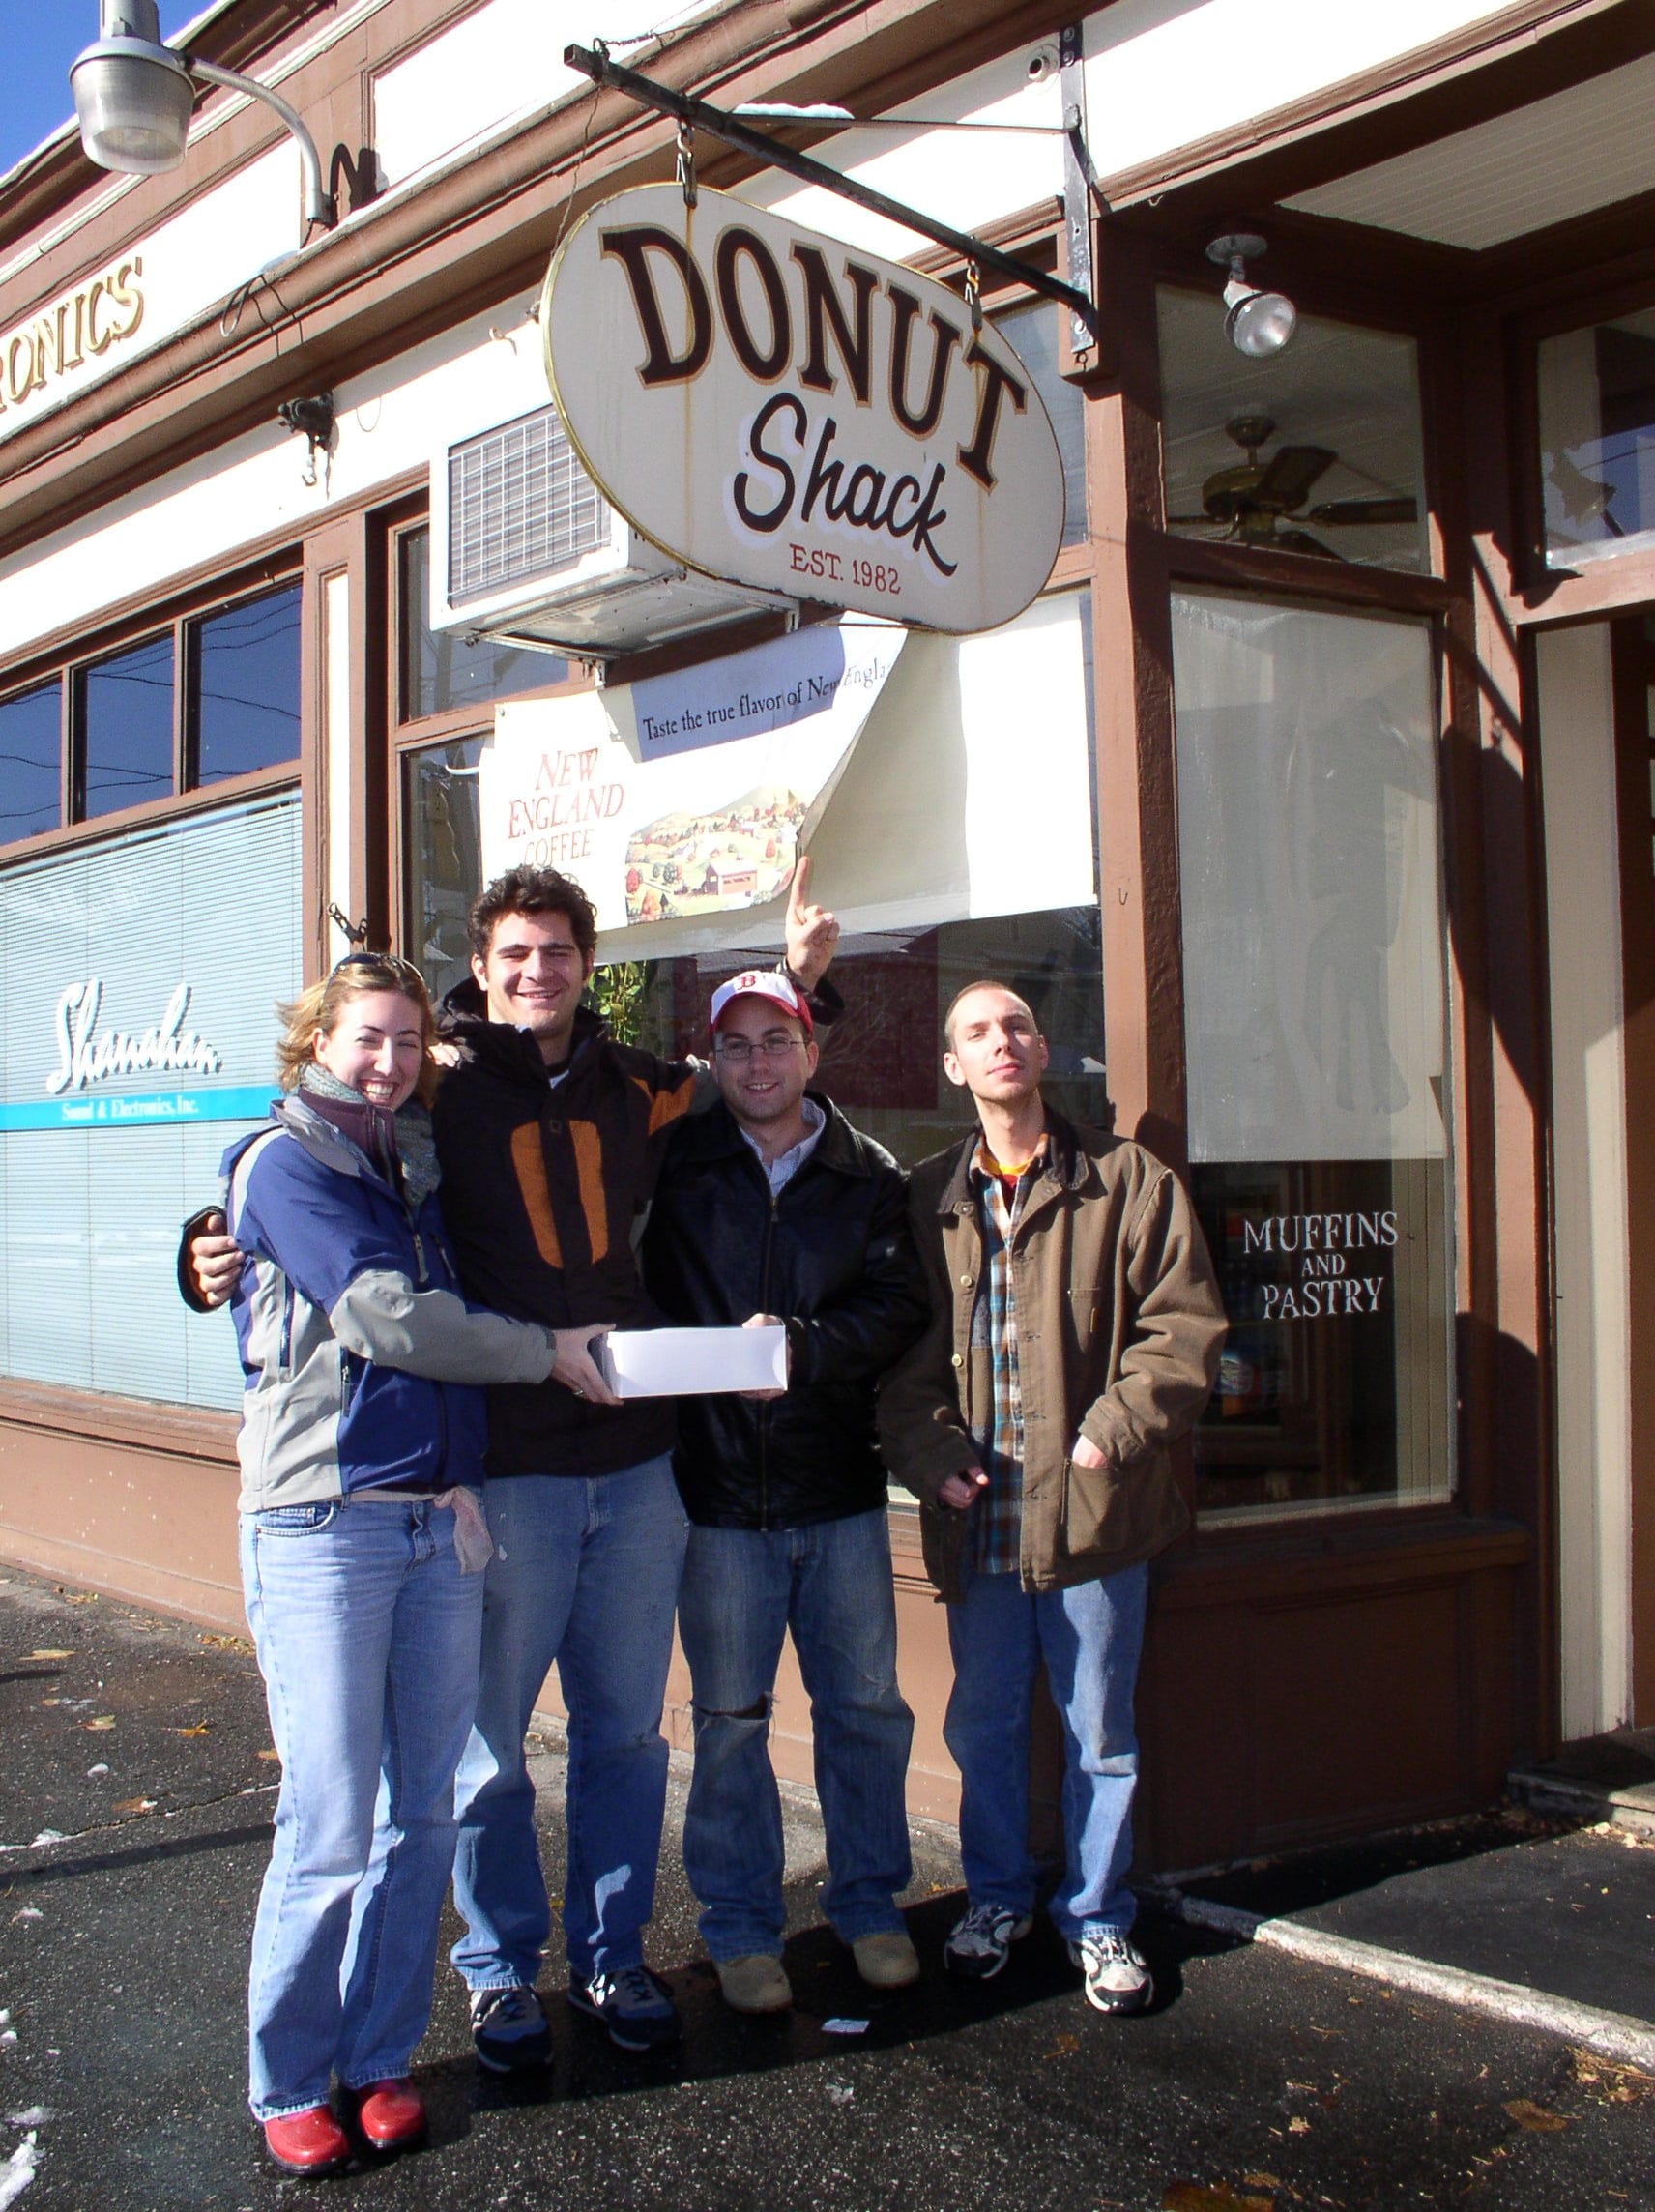 01-DonutShack, a picture from the donut tour